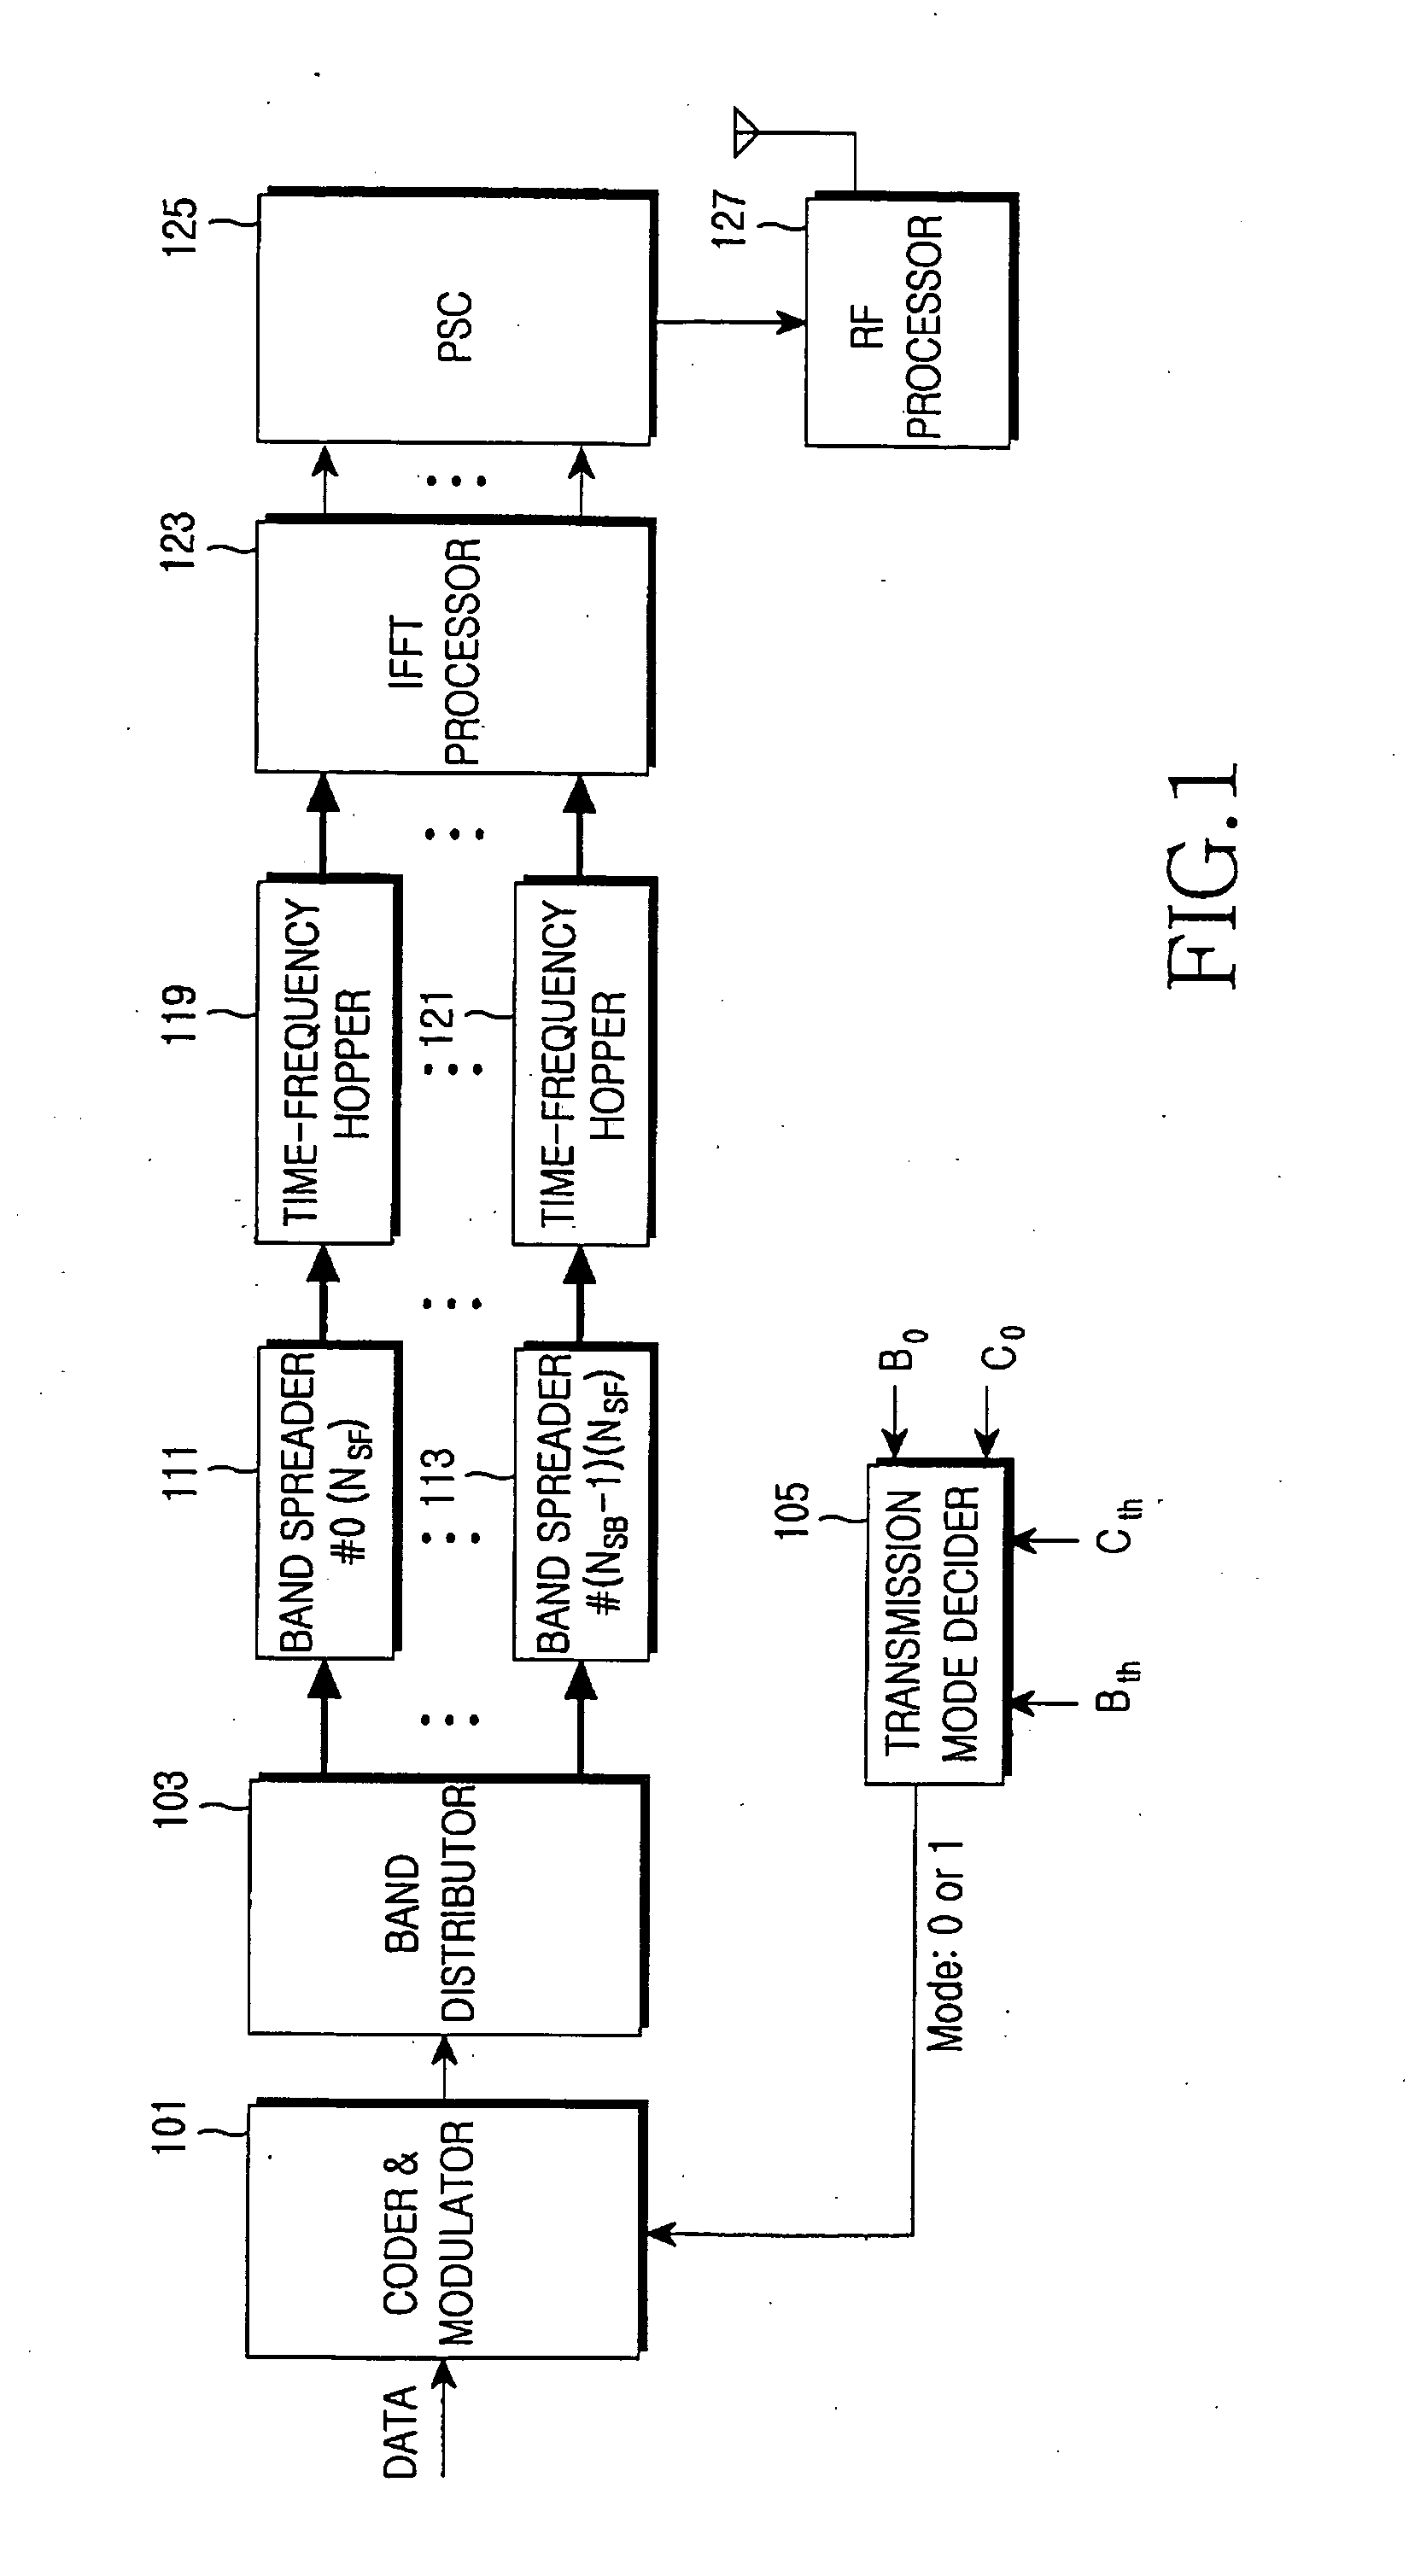 Apparatus and method for switching between an AMC mode and a diversity mode in a broadband wireless communication system